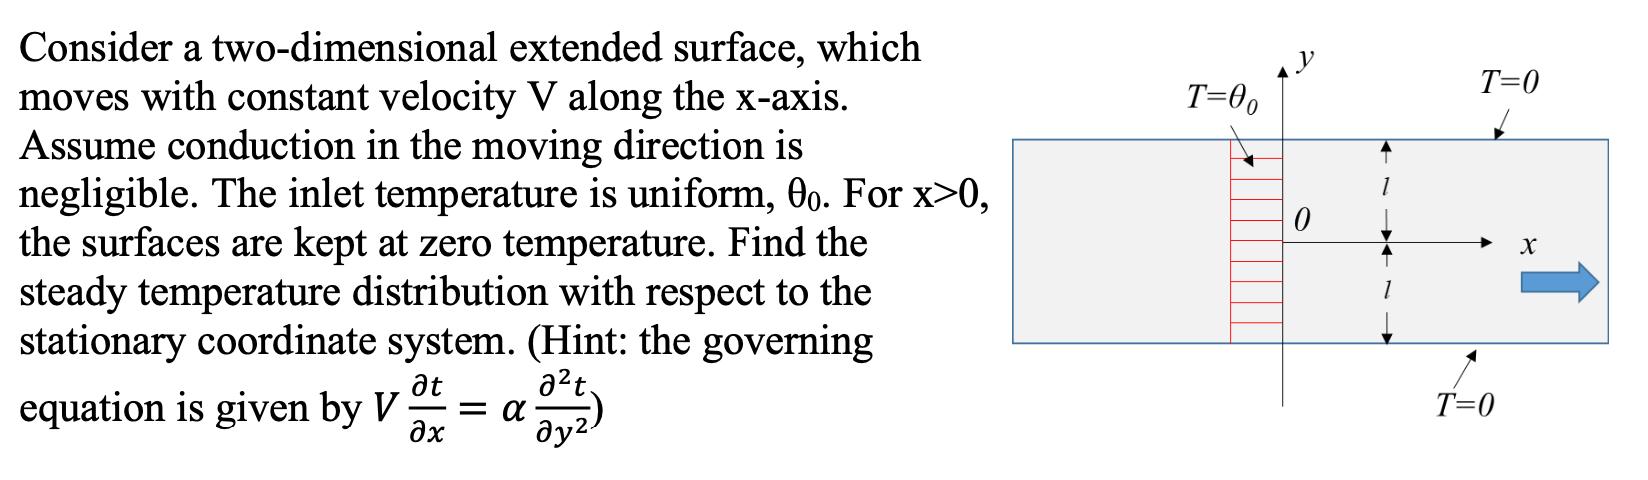 Consider a two-dimensional extended surface, which moves with constant velocity V along the x-axis. Assume